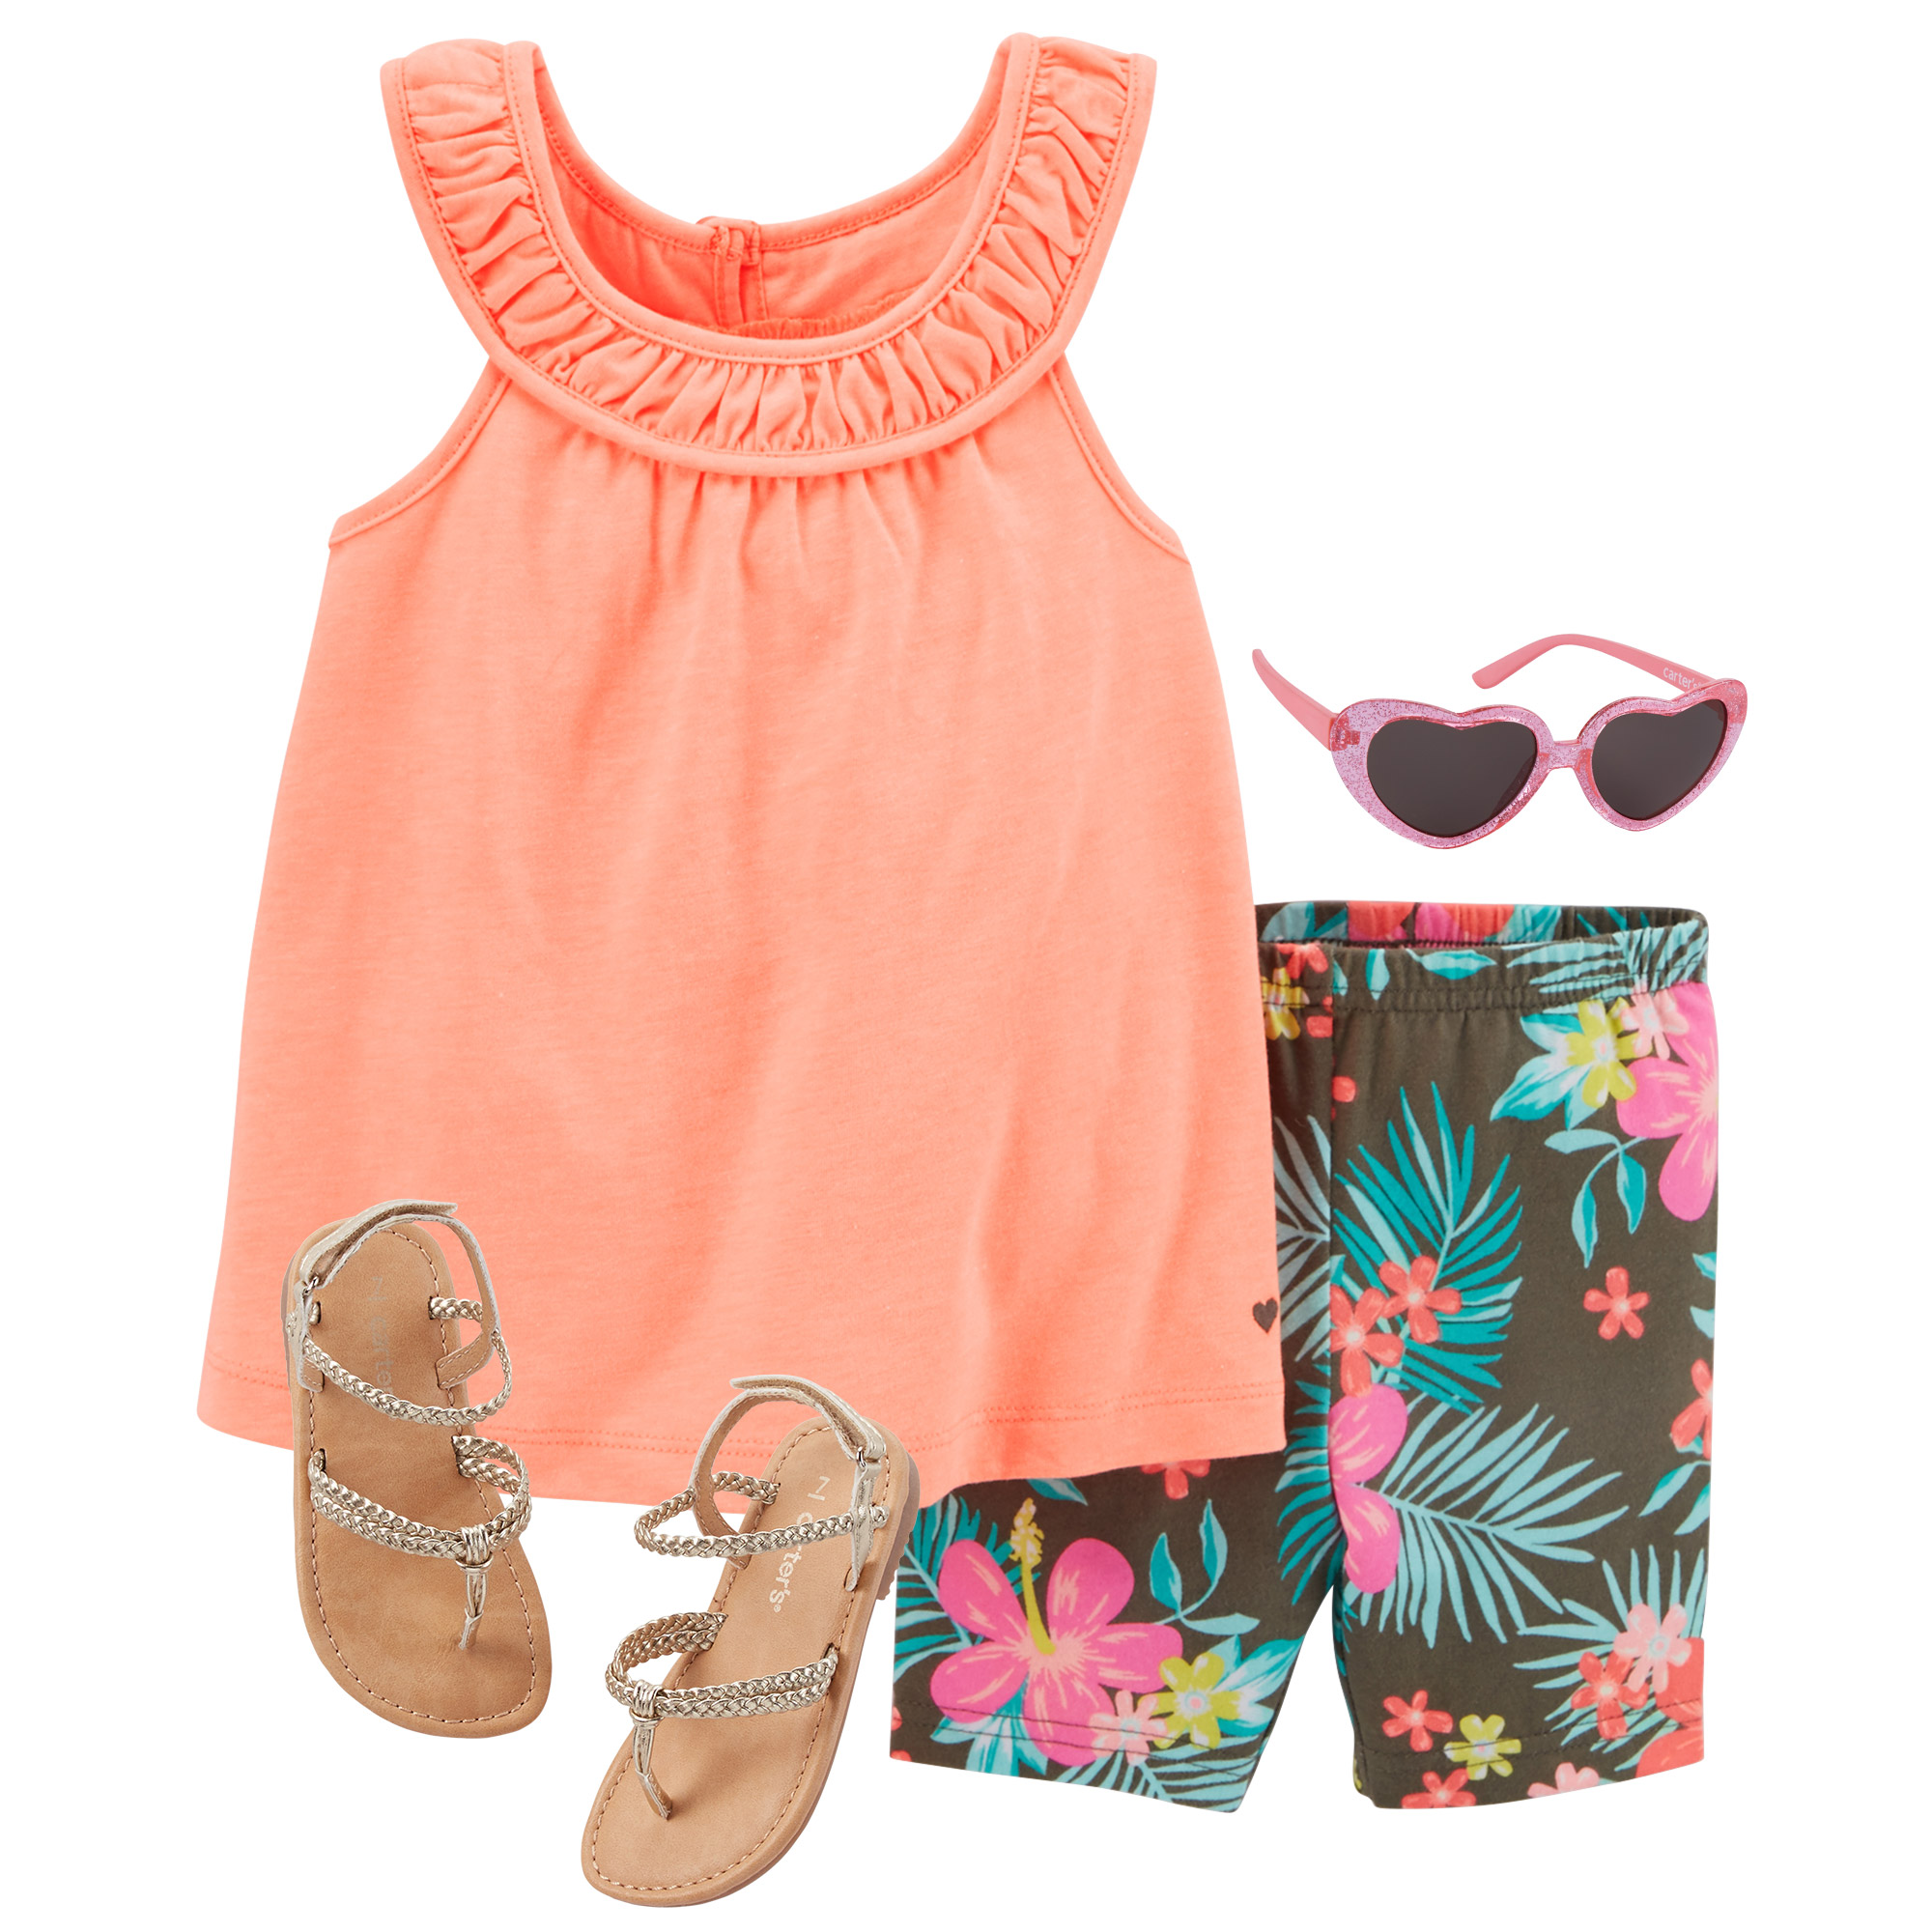 Summer Outfits for Little Girls - Outfit Ideas HQ